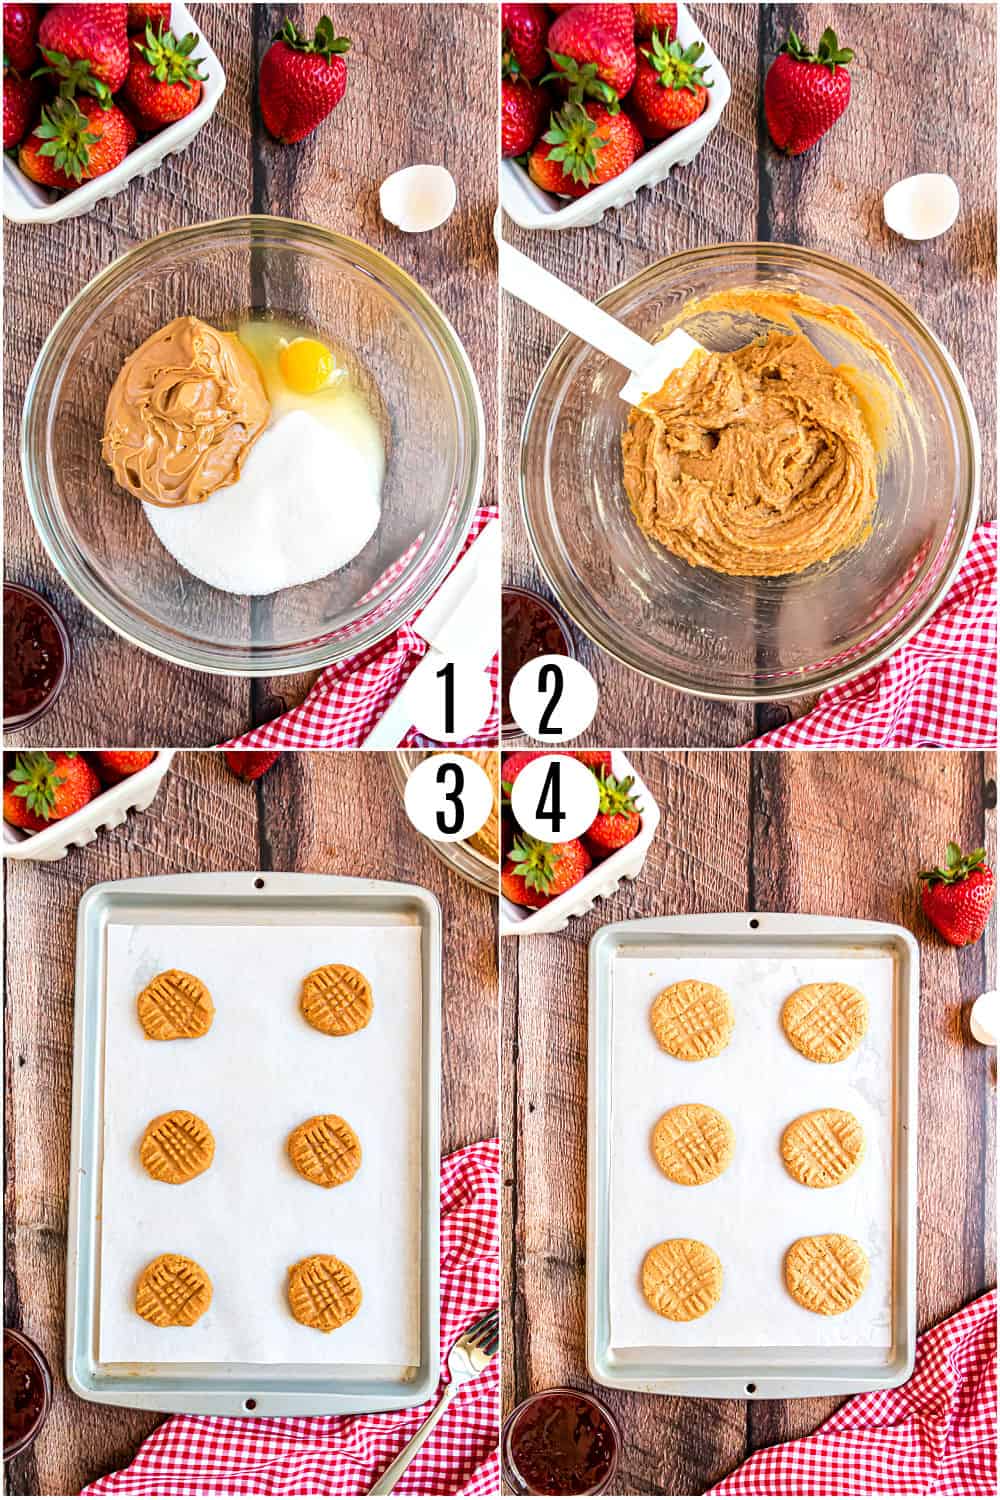 Step by step photos showing how to make peanut butter and jelly cookies.